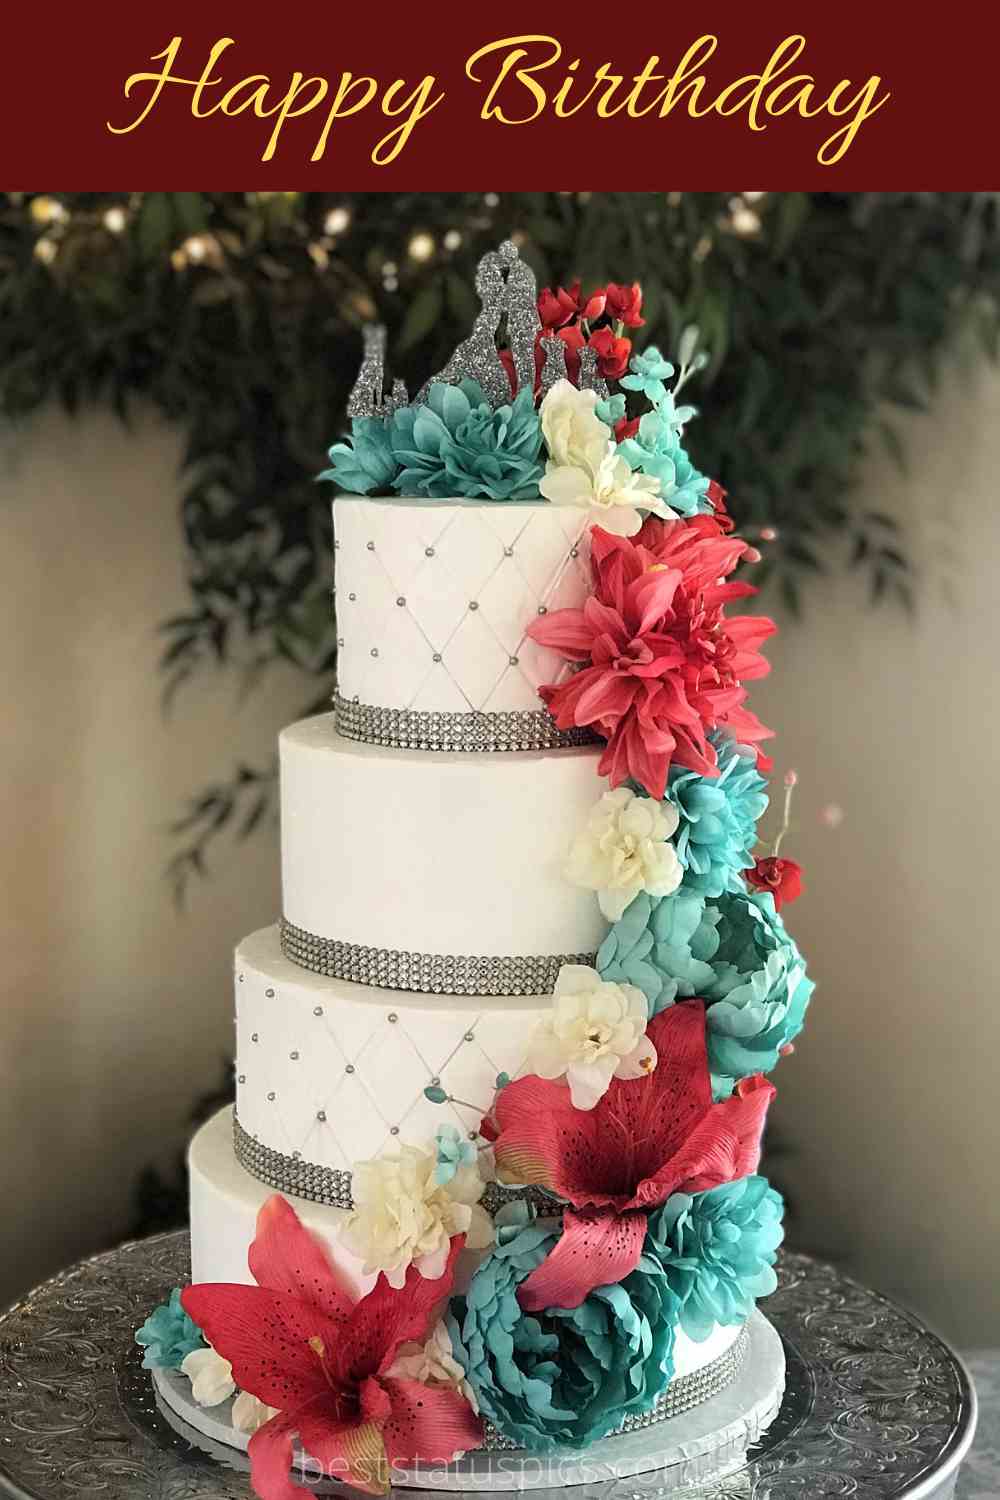 Floral Birthday Cake Upgraded Classy Flowers Florist In Tinley Park,IL  Florist | Flower Delivery Tinely Park, IL 60477